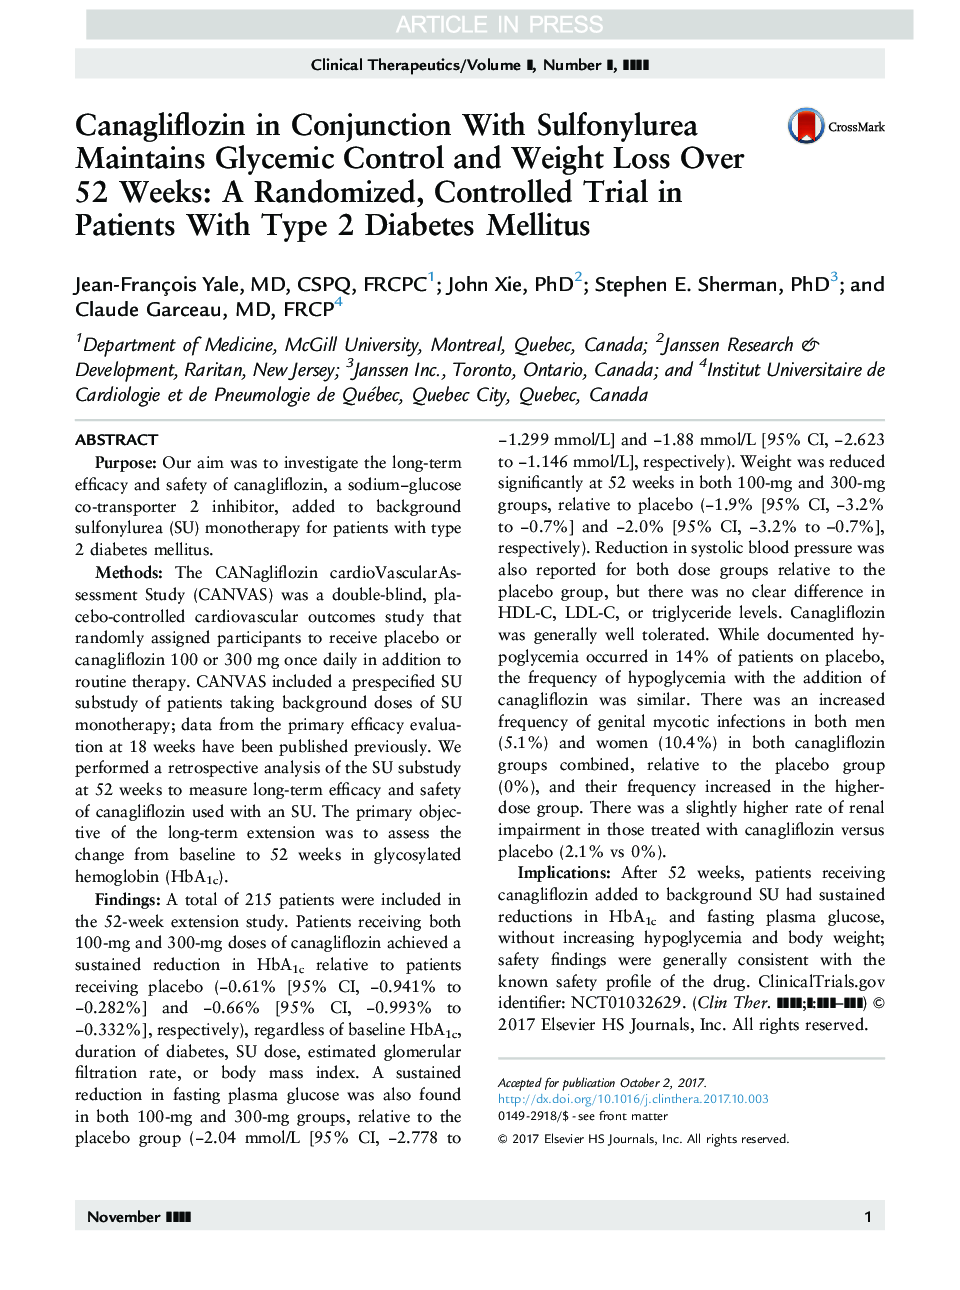 Canagliflozin in Conjunction With Sulfonylurea Maintains Glycemic Control and Weight Loss Over 52 Weeks: A Randomized, Controlled Trial in Patients With Type 2 Diabetes Mellitus